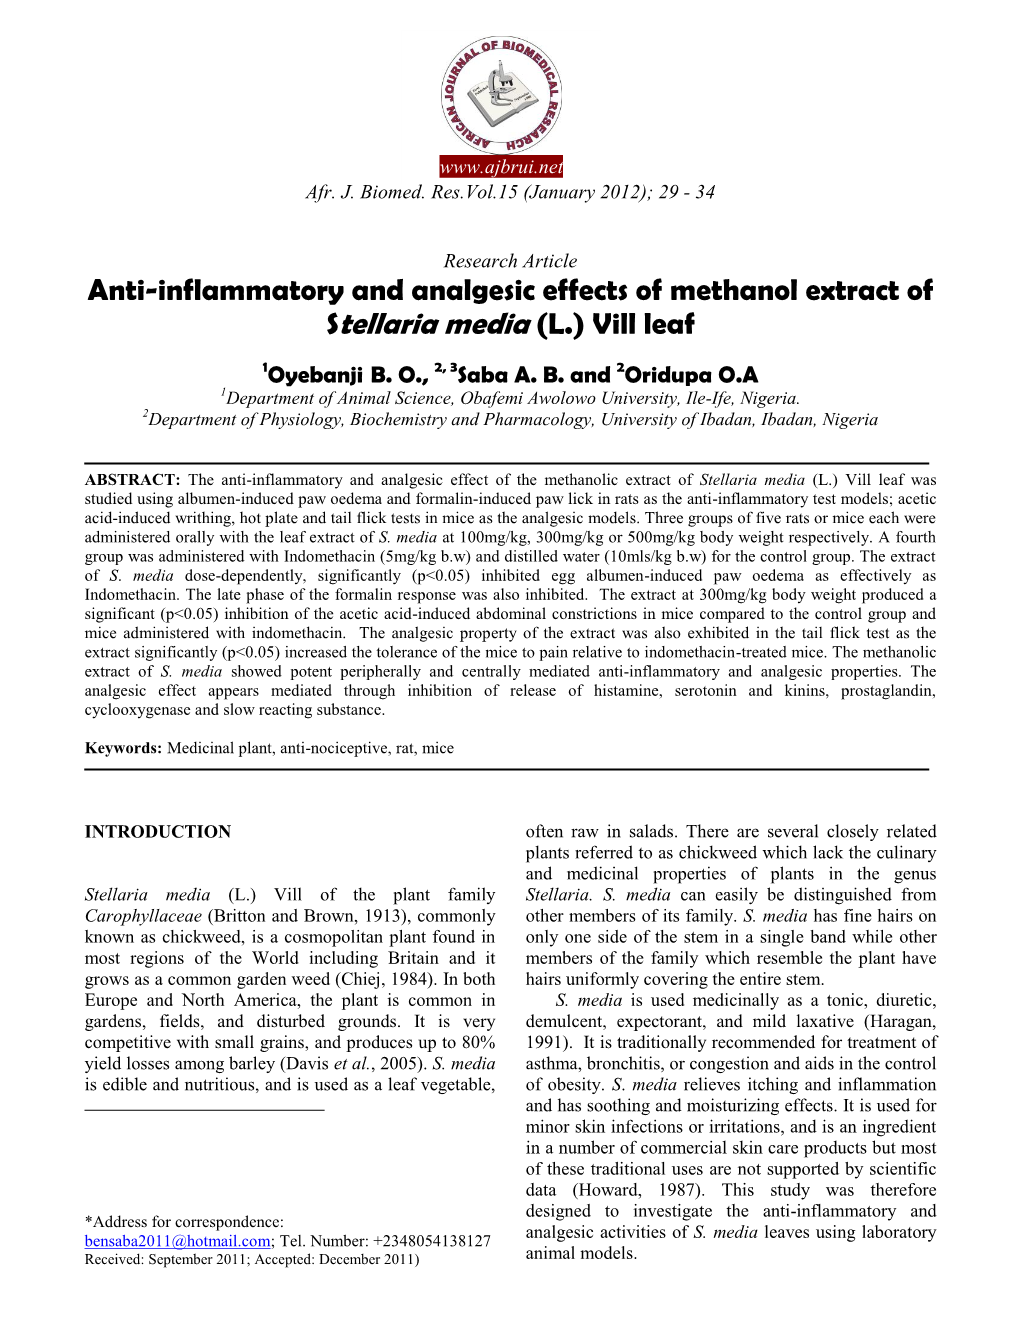 Anti-Inflammatory and Analgesic Effects of Methanol Extract of Stellaria Media (L.) Vill Leaf